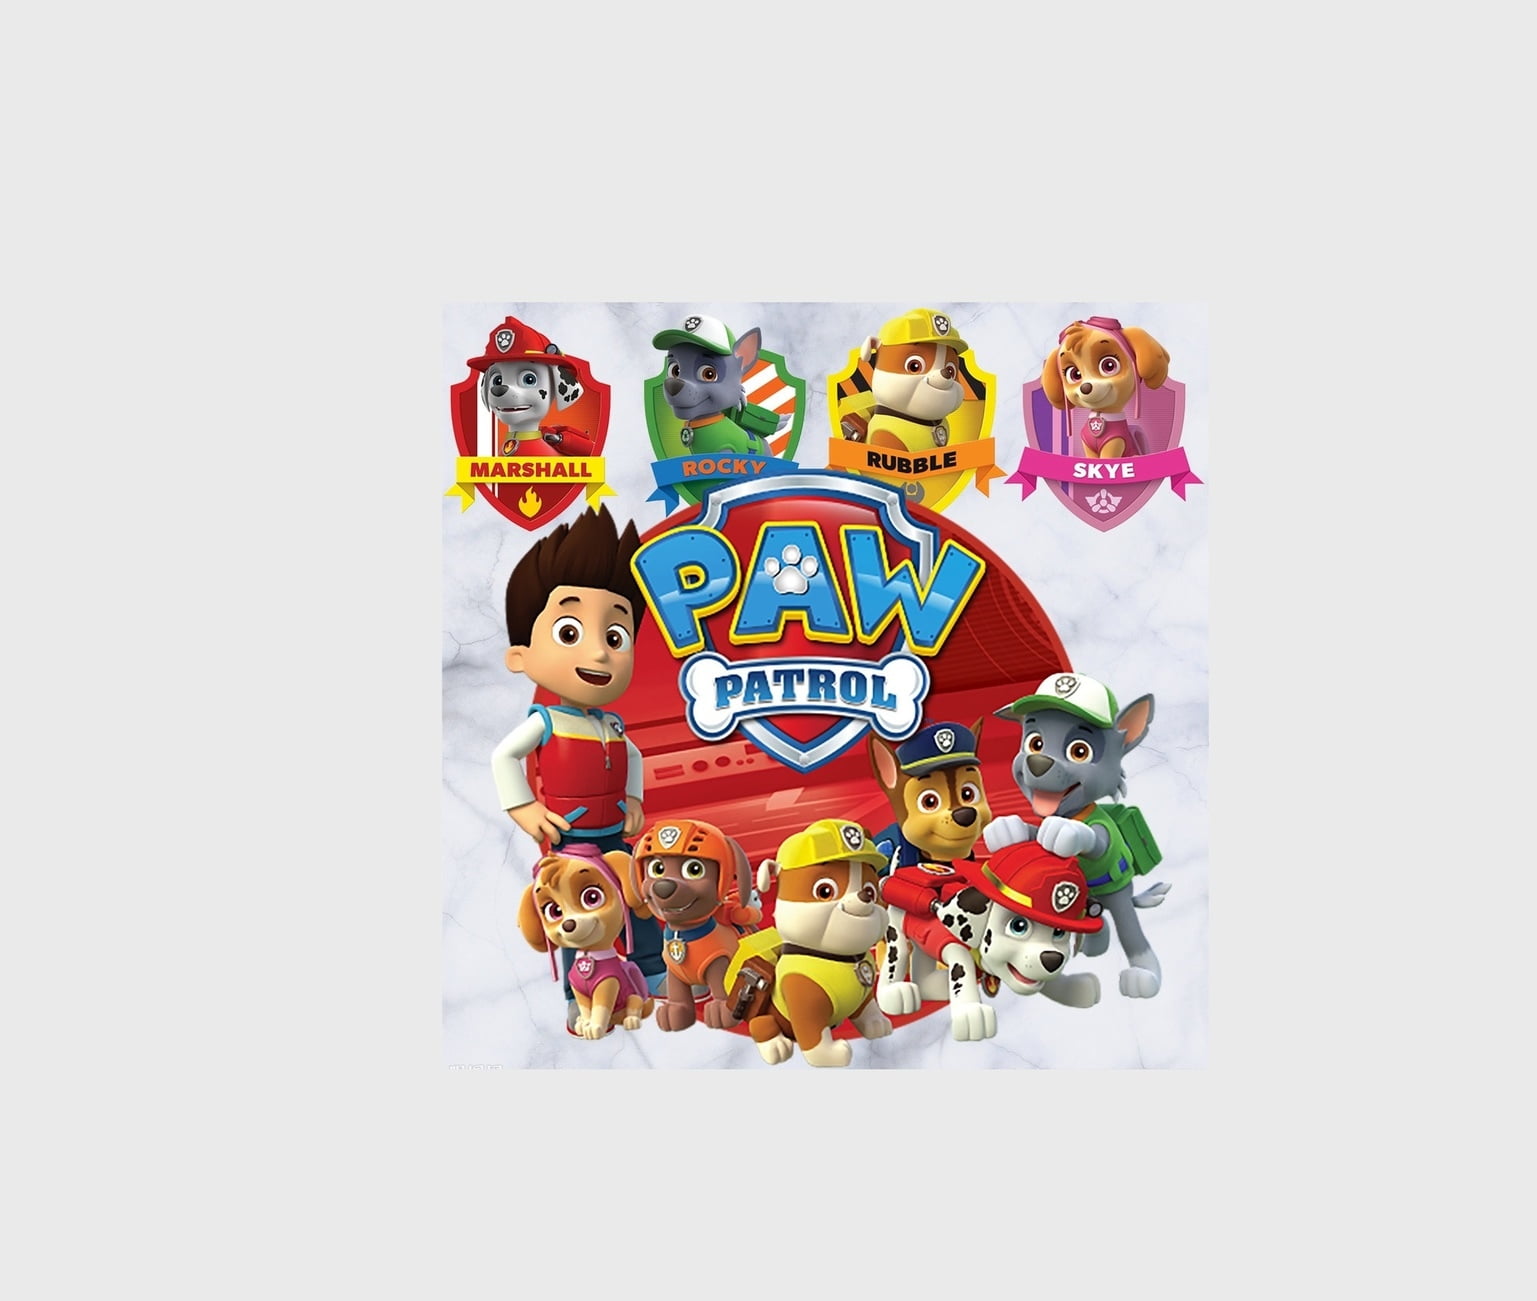 ansøge Turist virksomhed Paw Patrol Named Characters Personalized Edible Cake Topper Image  ABPID00029V1 - Walmart.com